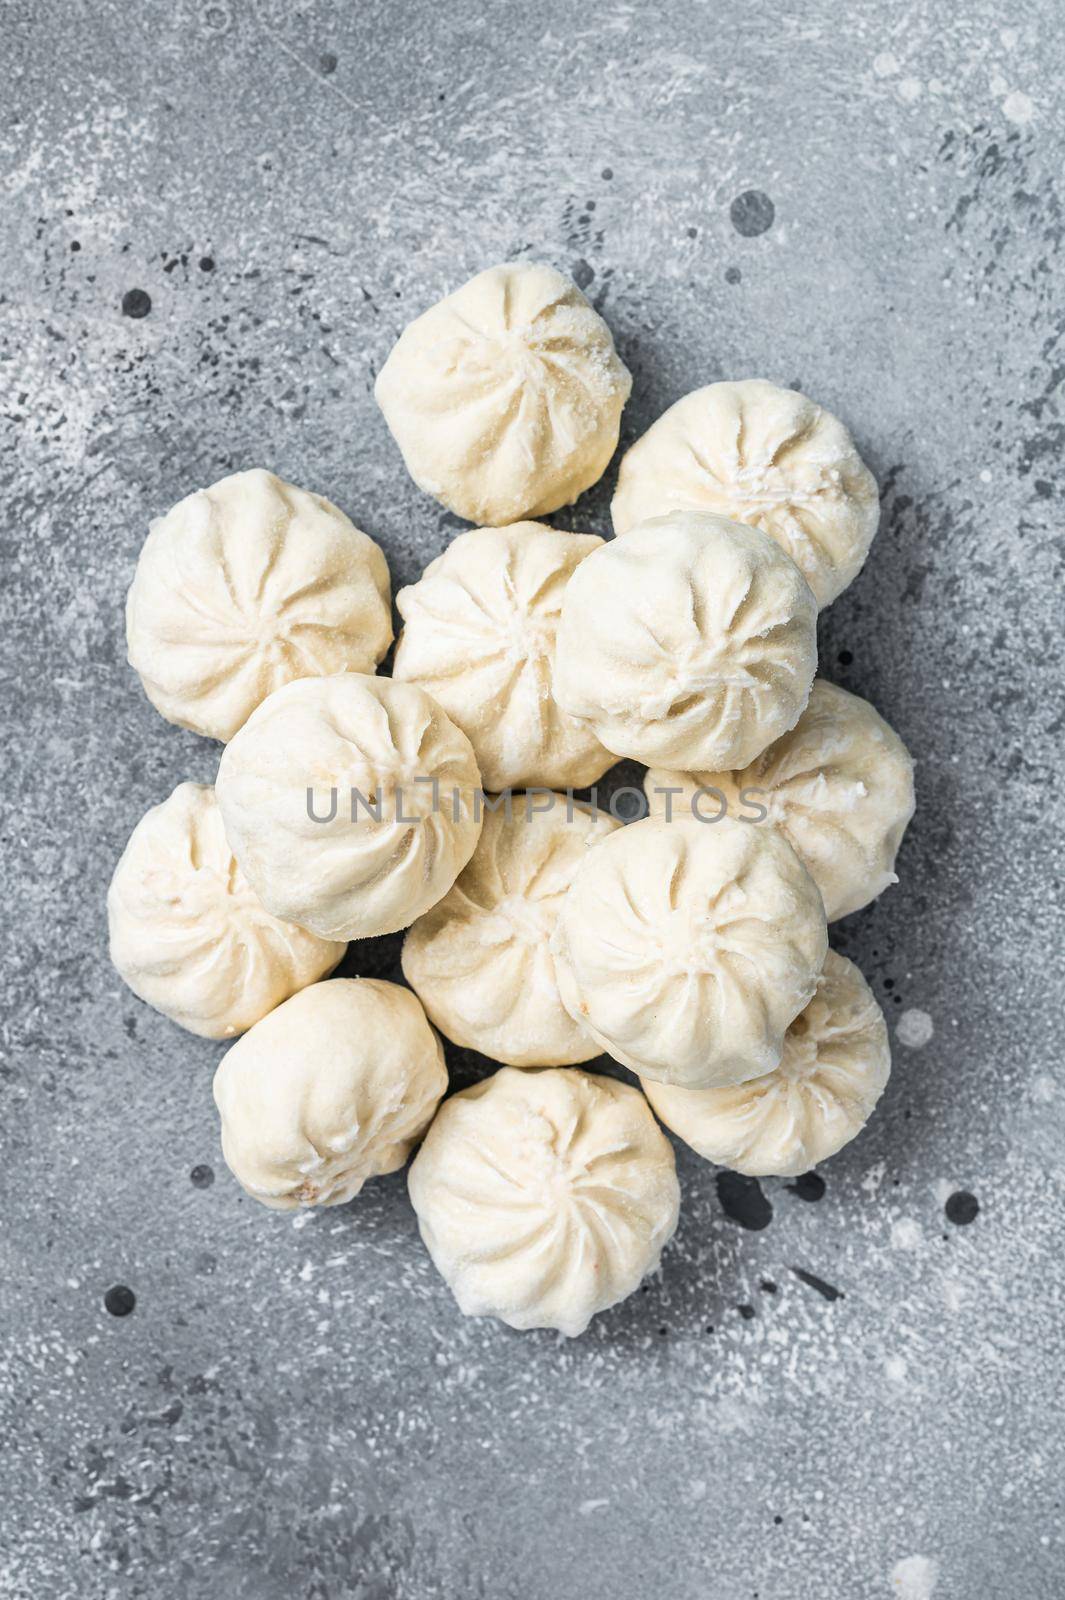 Frozen uncooked baozi dumplings stuffed with meat. Gray background. Top view by Composter